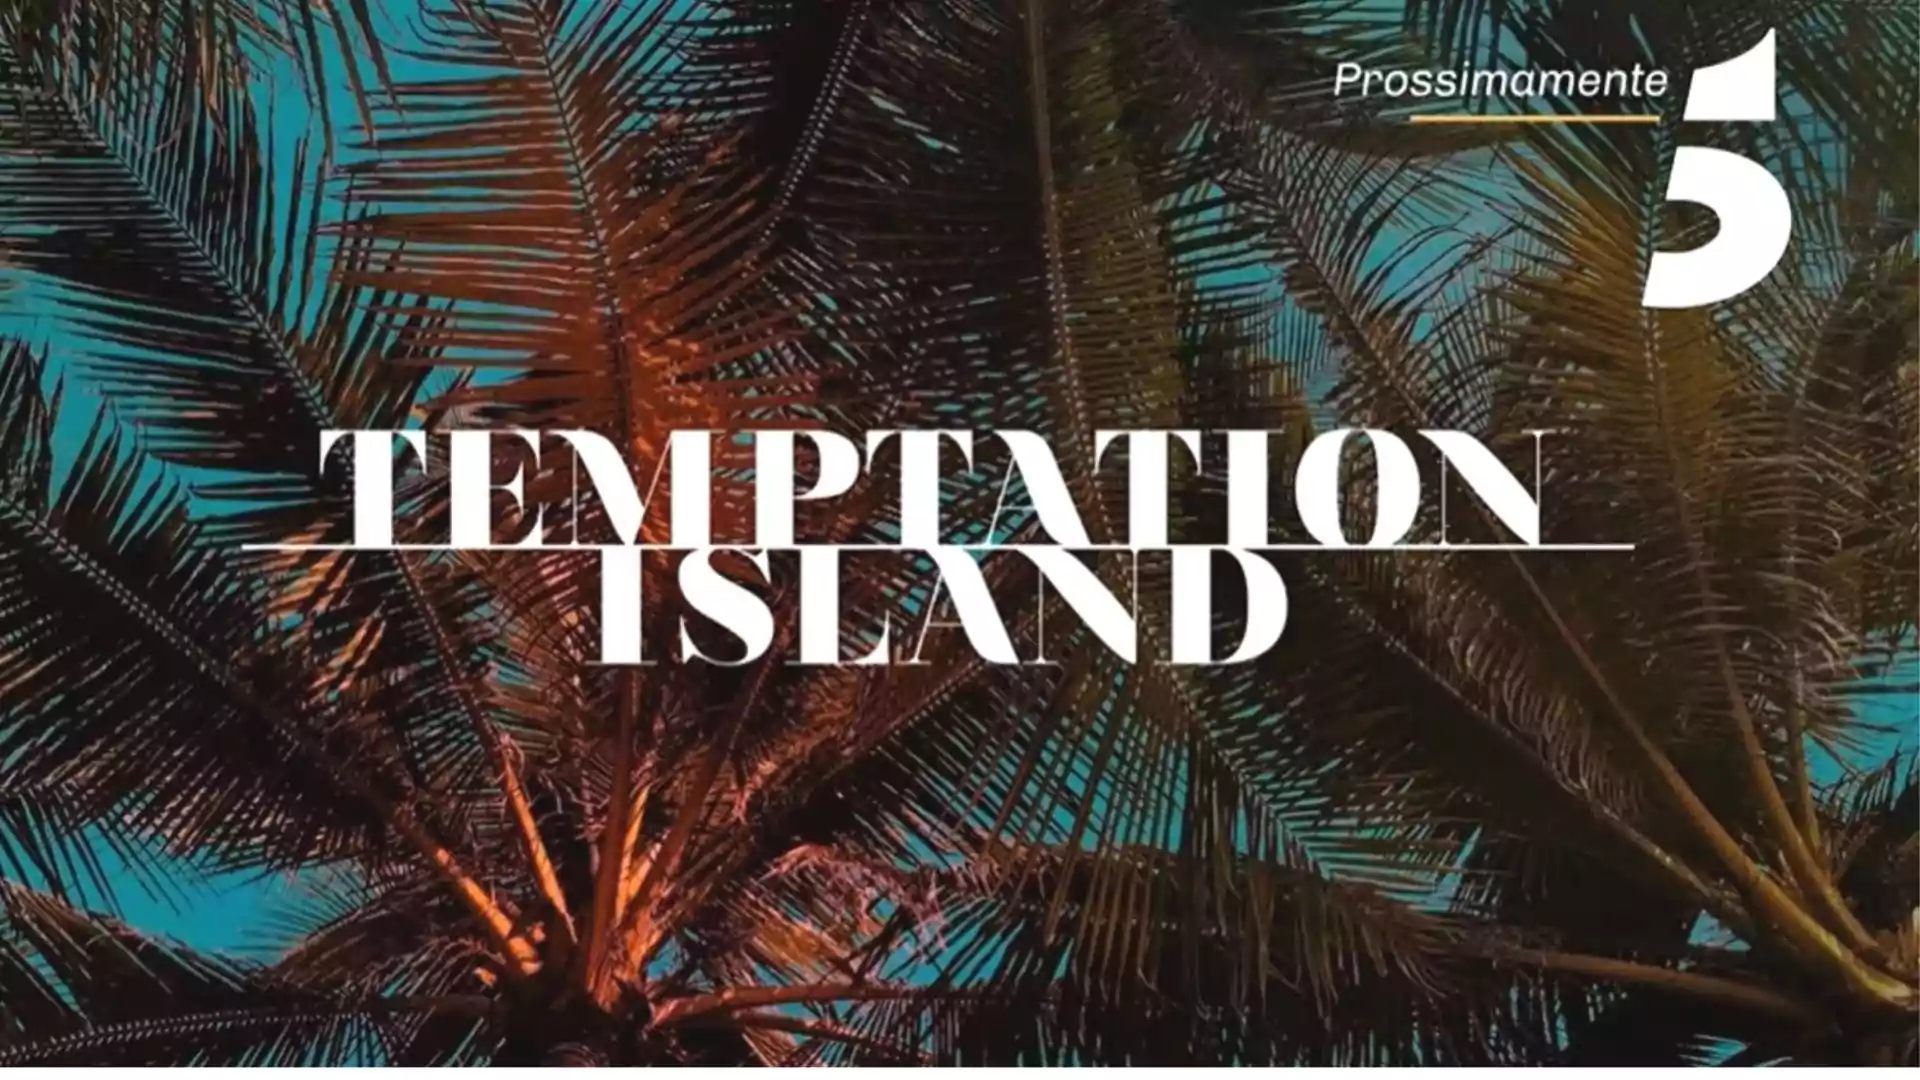 Temptation Island Parents Guide and Age Rating